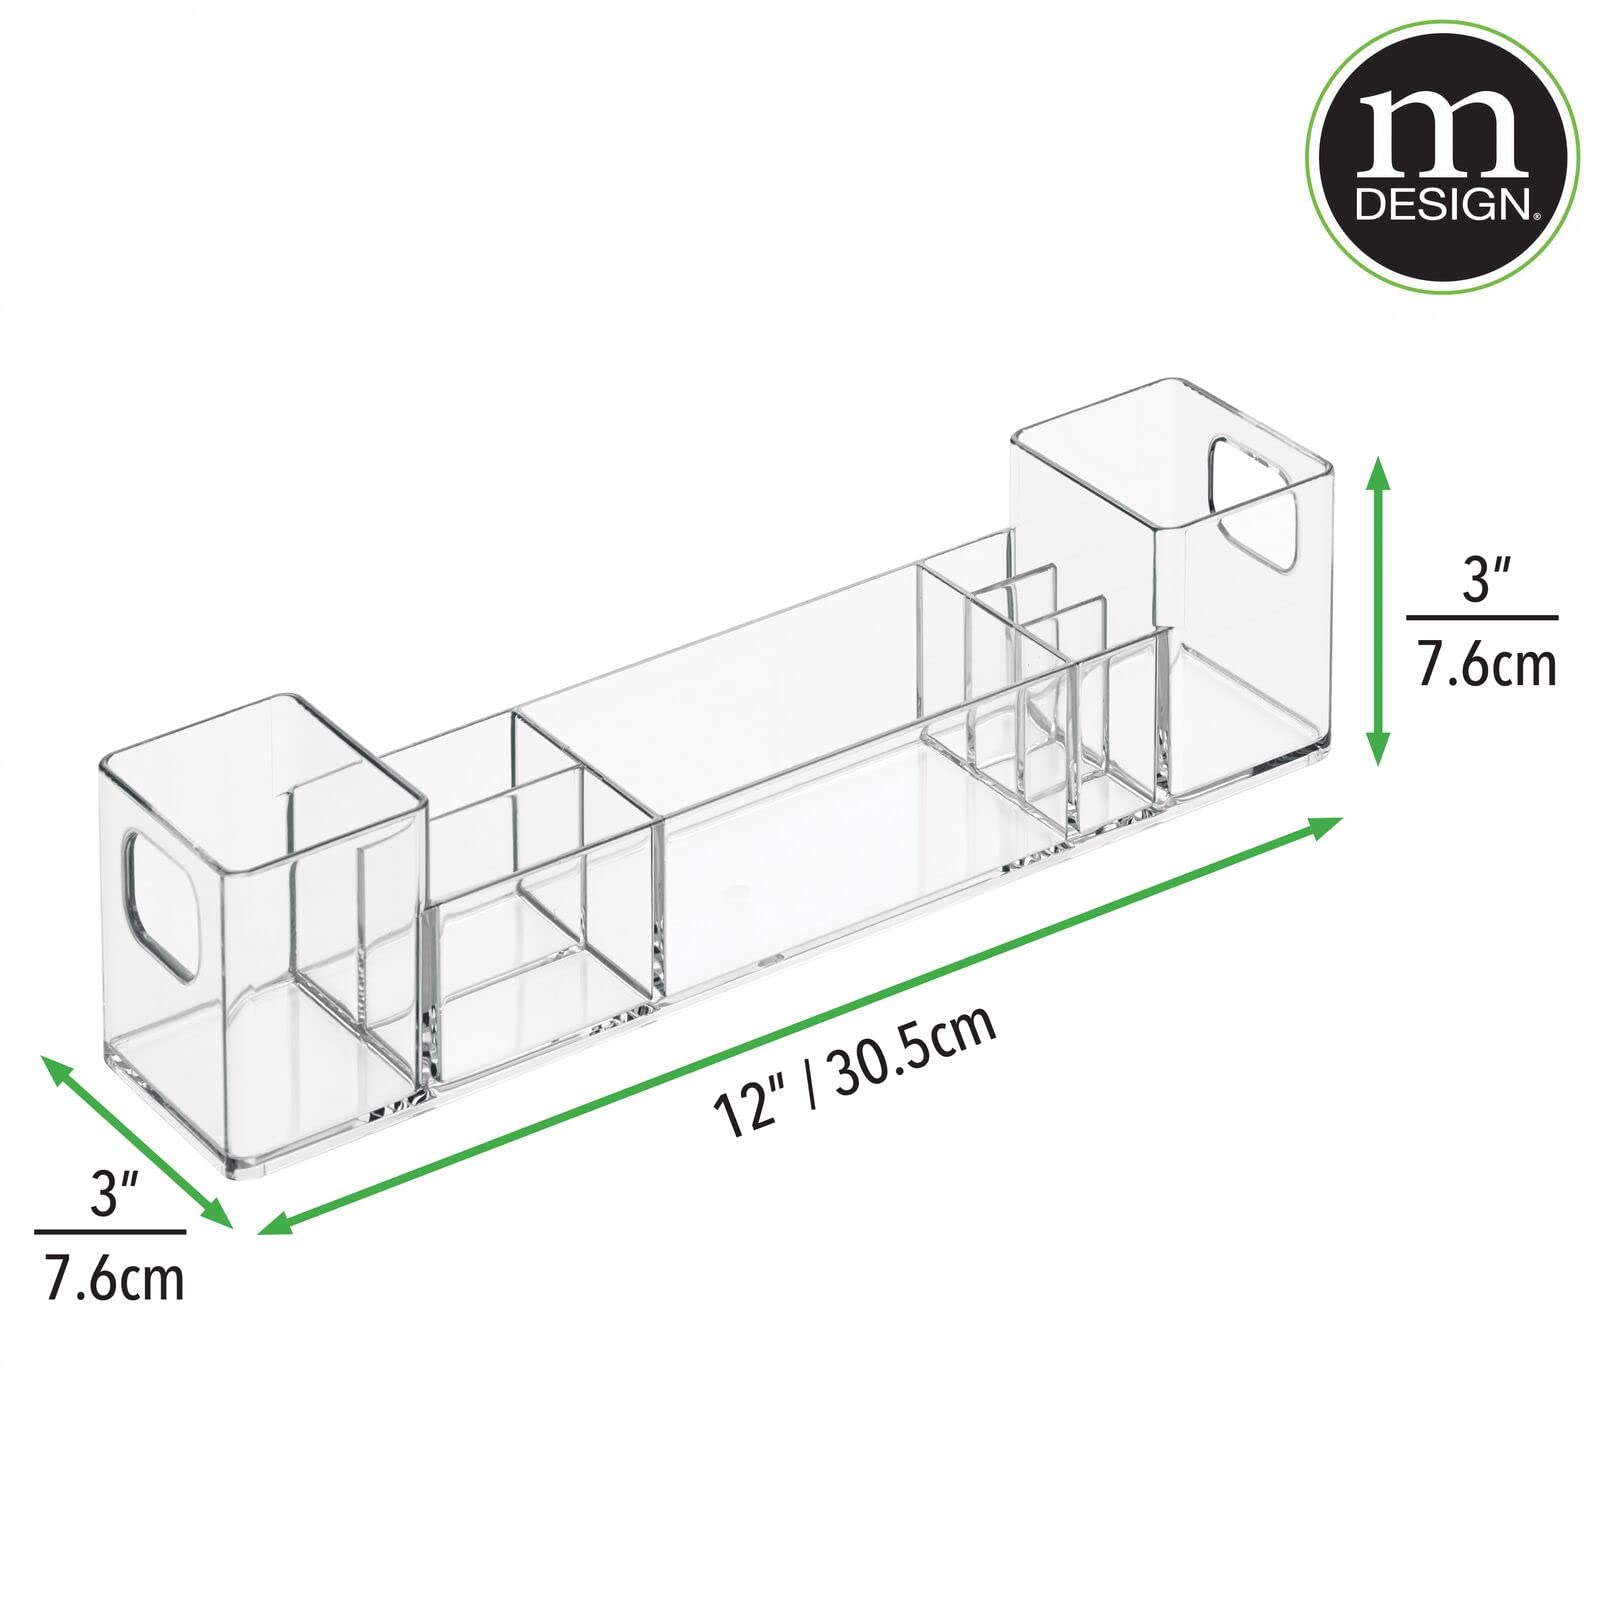 mDesign Plastic Bathroom Medicine Cabinet Organizer with Handles - Divided Vanity Storage Holder/Container for Cotton Swabs, Makeup, Bathroom Essentials/Toiletries, Lumiere Collection, 2 Pack - Clear